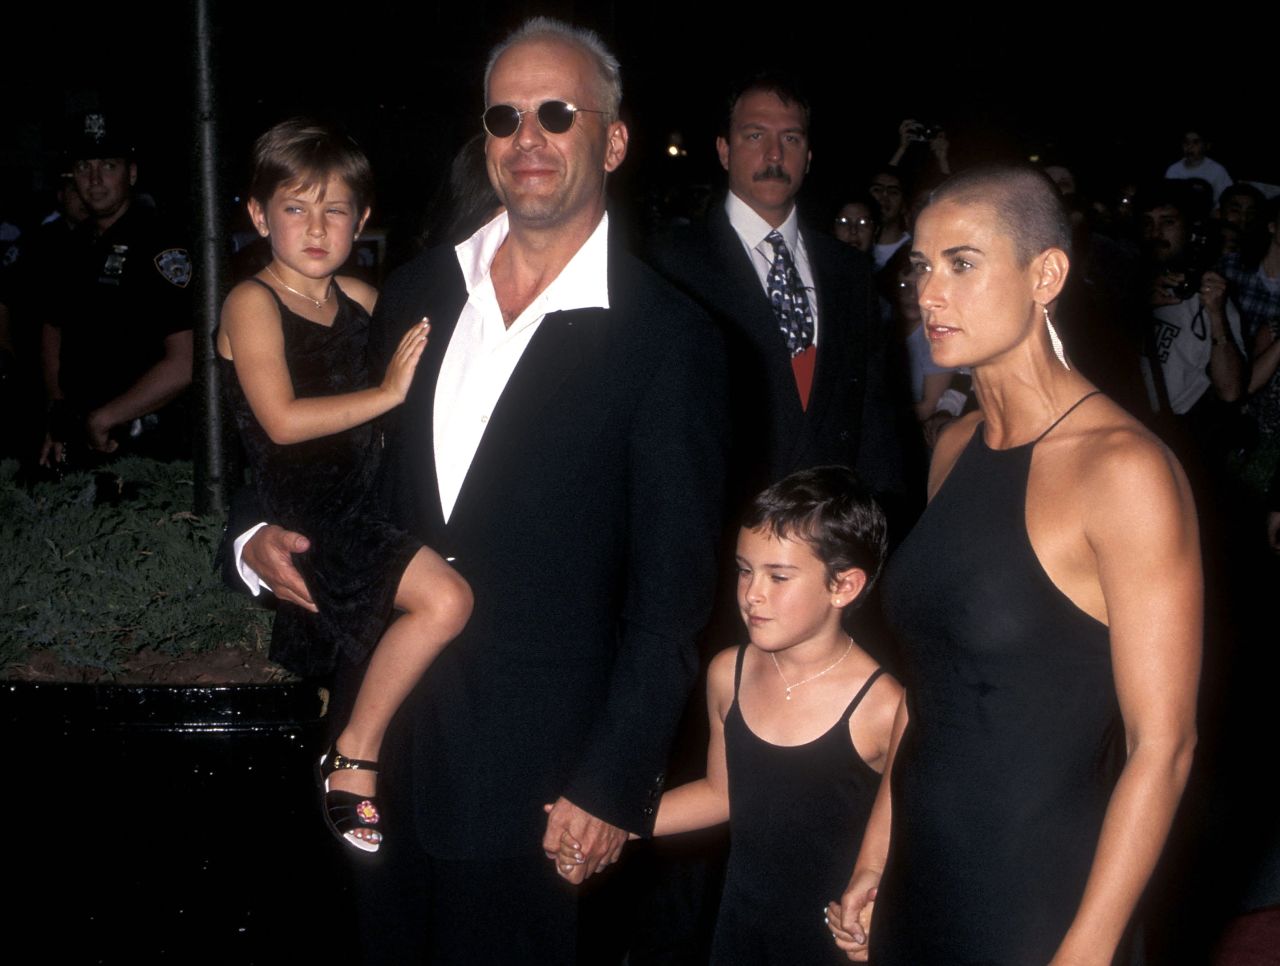 Willis and his family — from left, Scout, Rumer and Moore — attend the premiere of Moore's new movie "Striptease" in 1996.